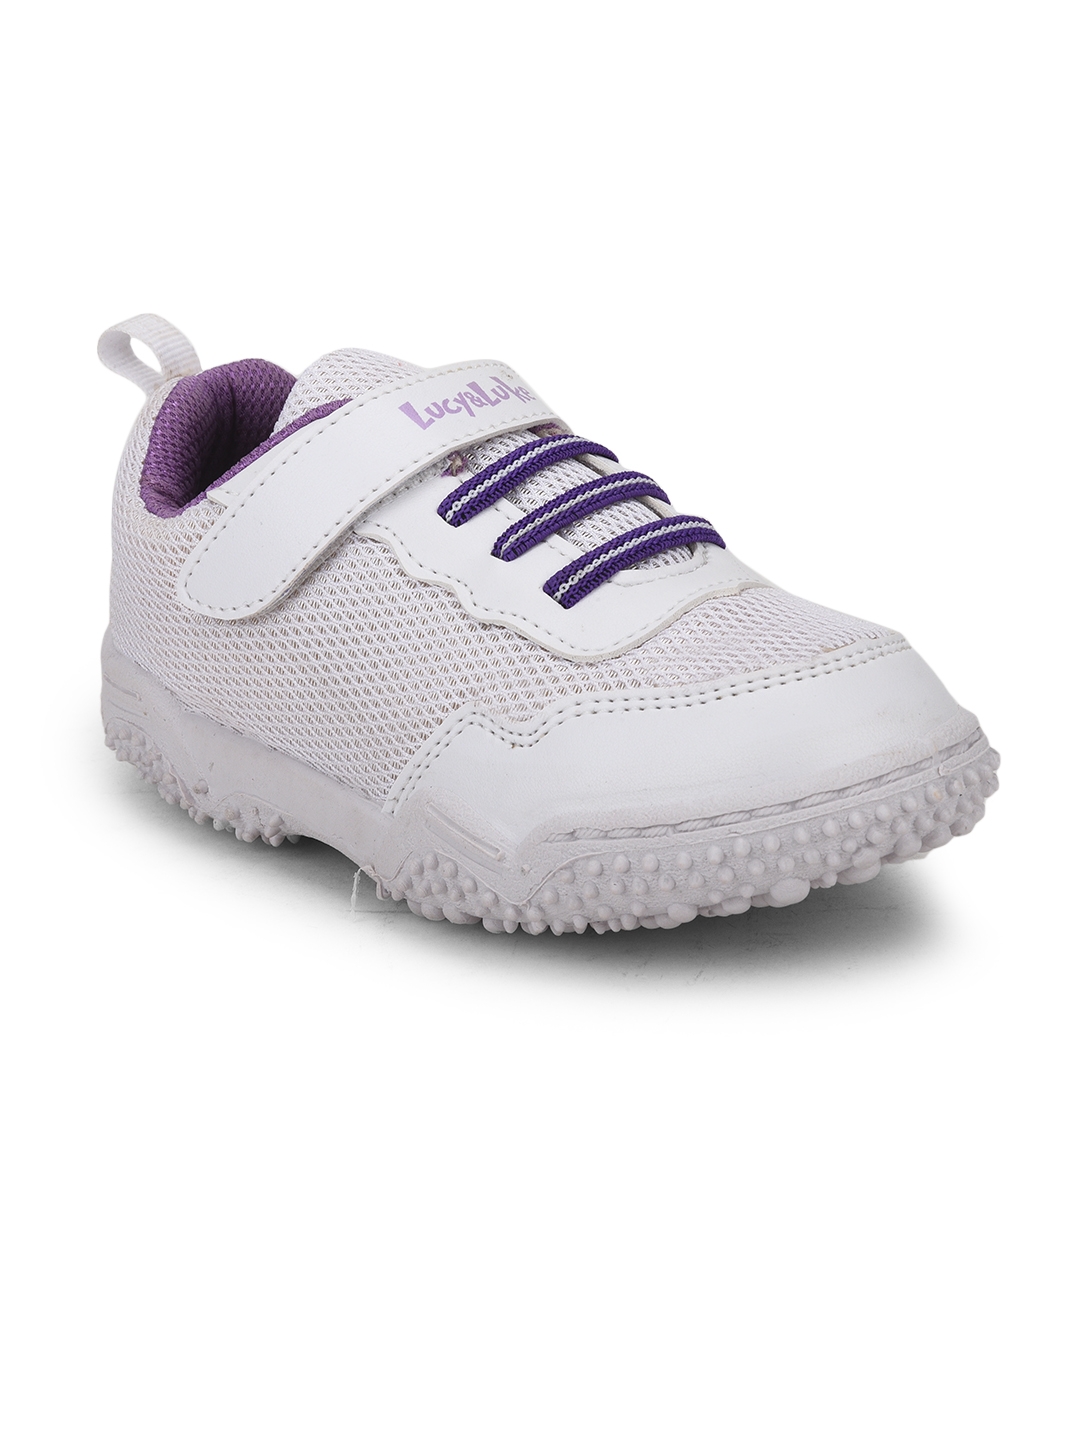 Liberty | Lucy & Luke by Liberty White Sports Shoes QUICK-1 MRP 1499 For :- Unisex